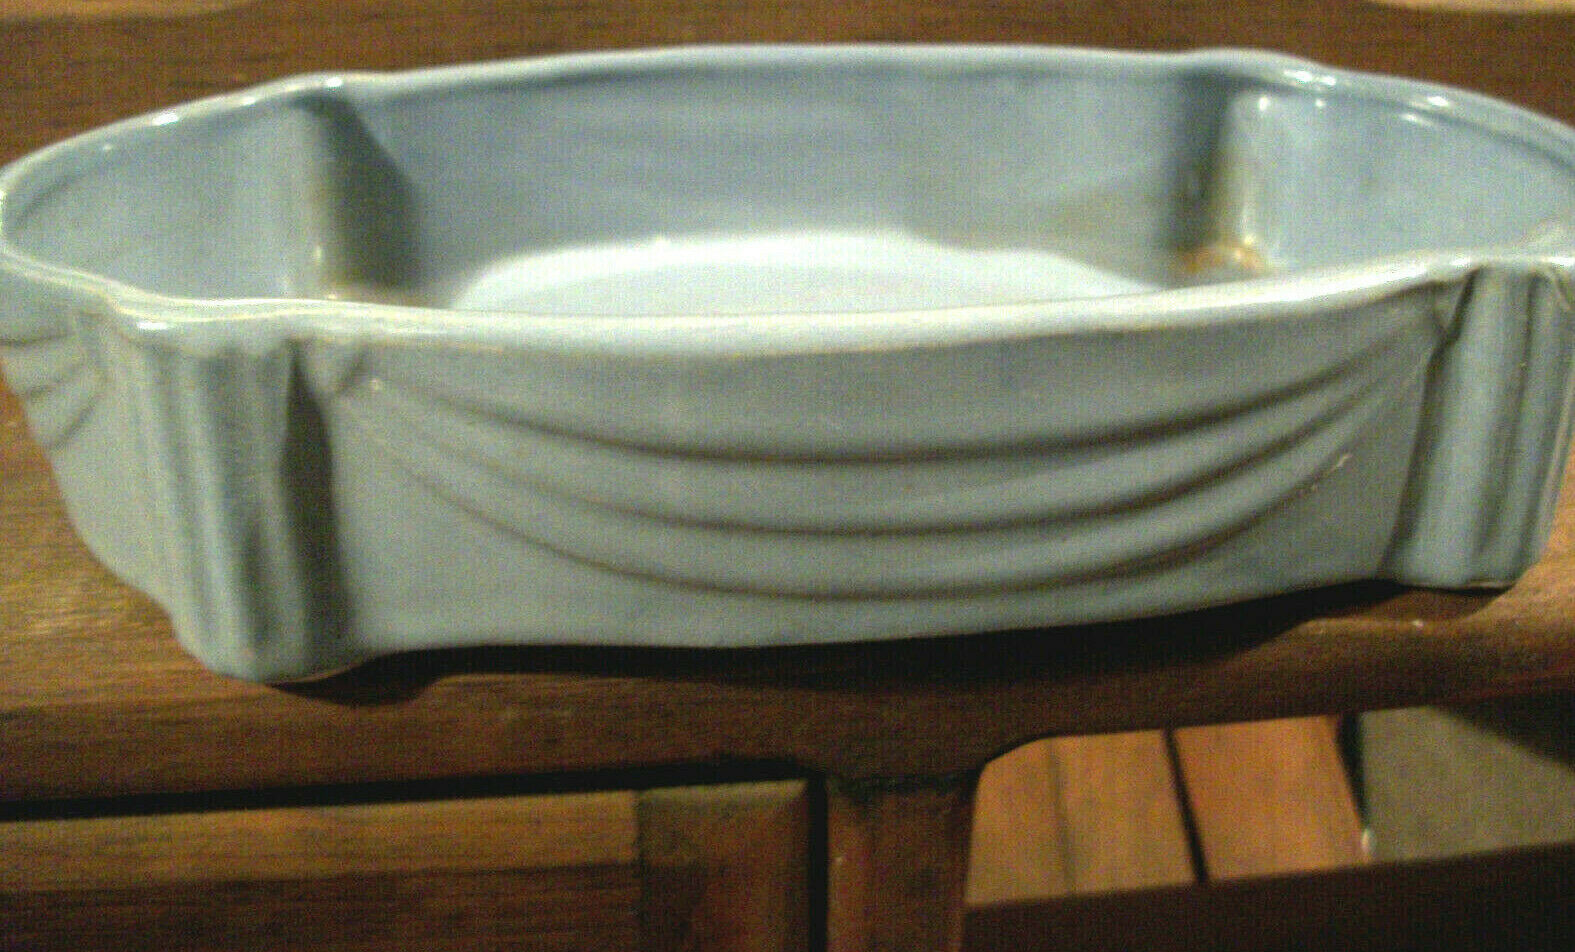 Brush Mccoy Usa 157 Baby Blue Ohio Pottery Vintage 1930's? Shed Antique Find